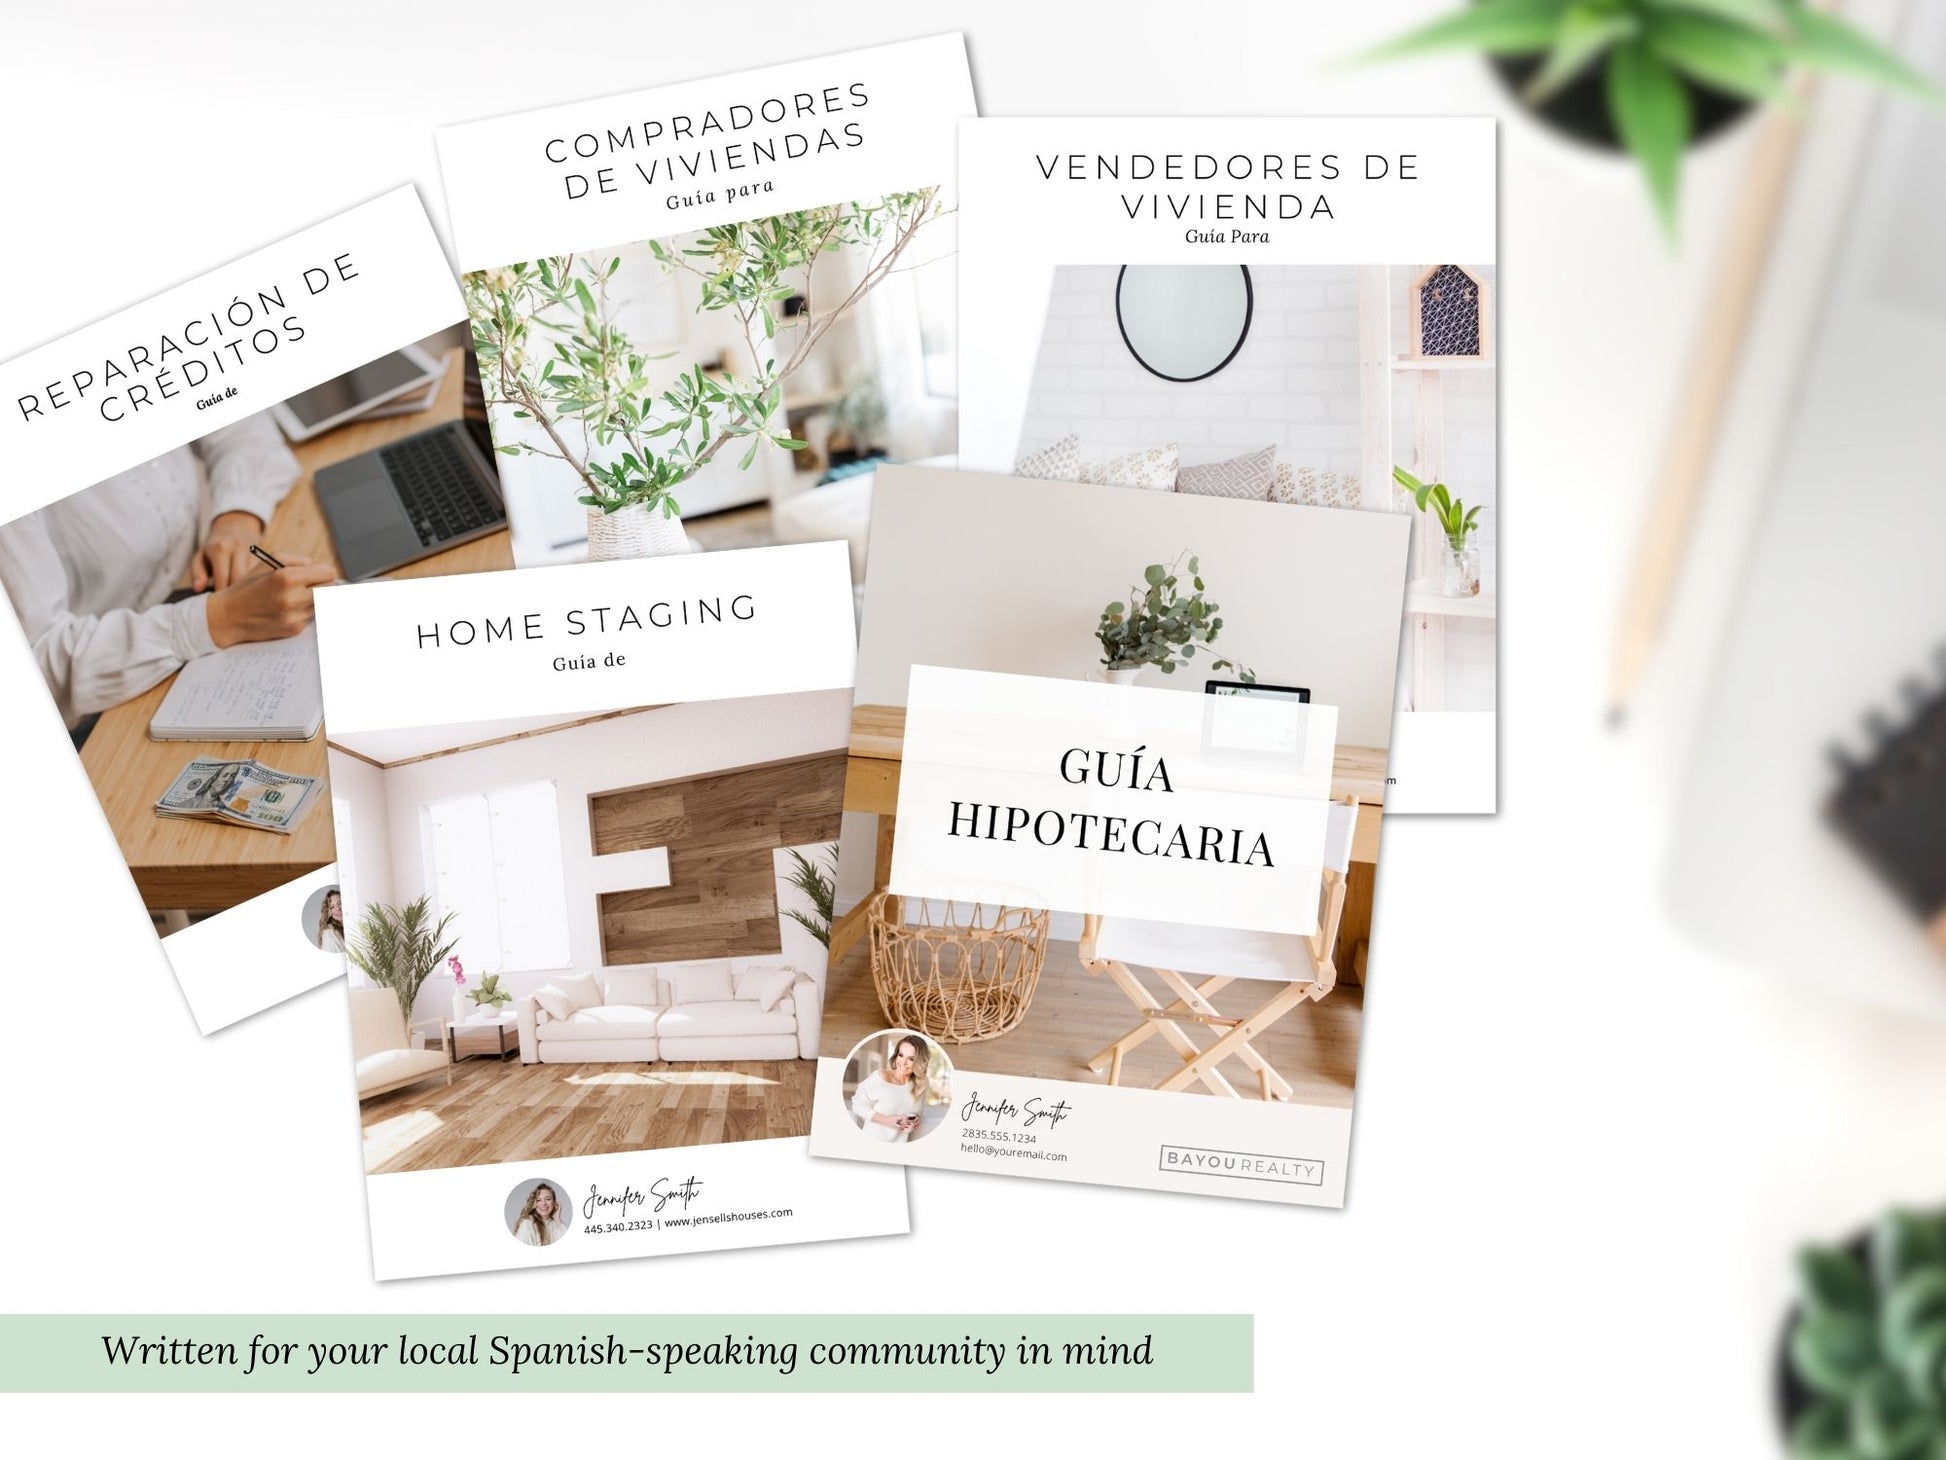 Spanish Real Estate Guide Bundle - Comprehensive guides in Spanish for buyers, sellers, mortgages, minimal credit repair, and minimal staging.